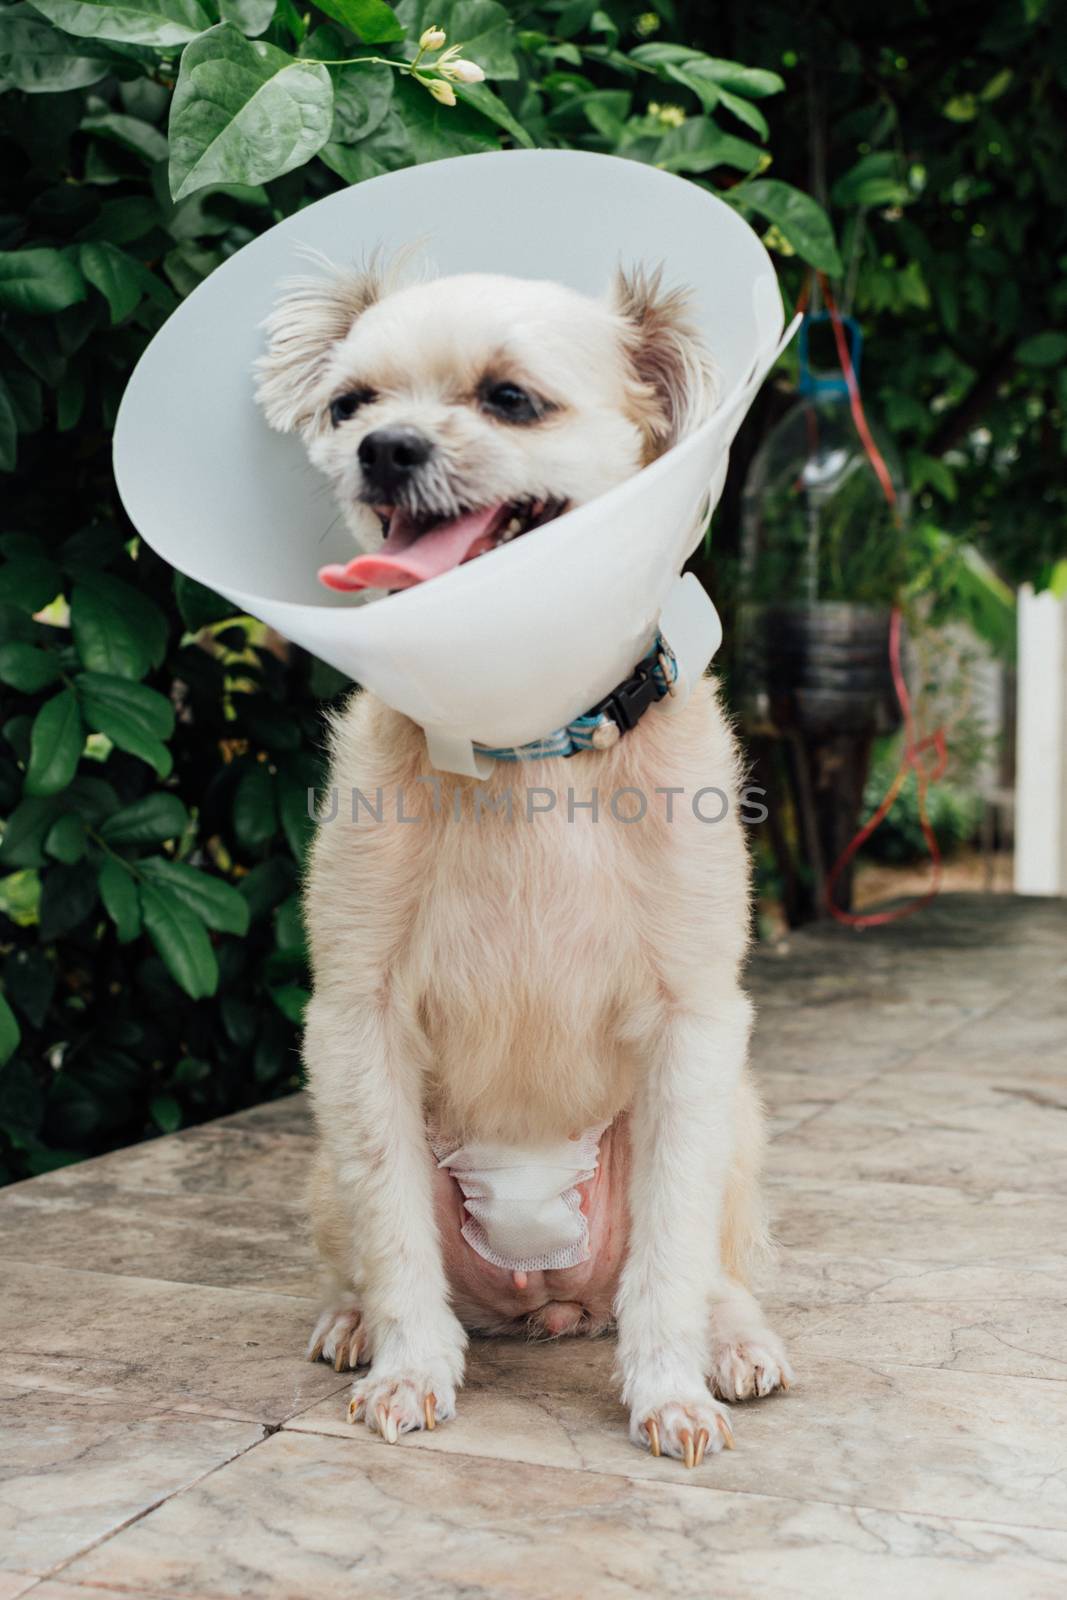 Dog abdomen surgery from uterus or womb wound sore with a bandage making by veterinarian doctor during the examination in veterinary clinic